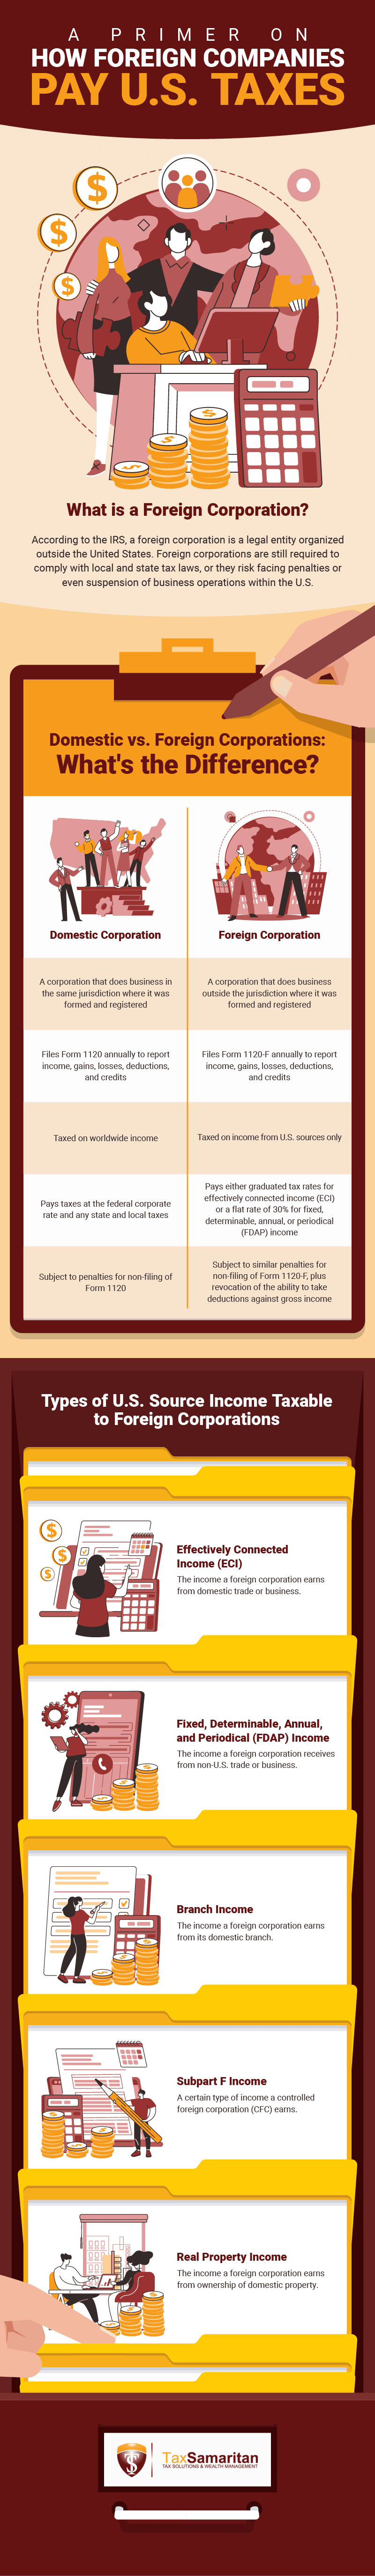 Infographic version of the article "A Primer on How Foreign Companies Pay U.S. TaxesA Primer on How Foreign Companies Pay U.S. Taxes"